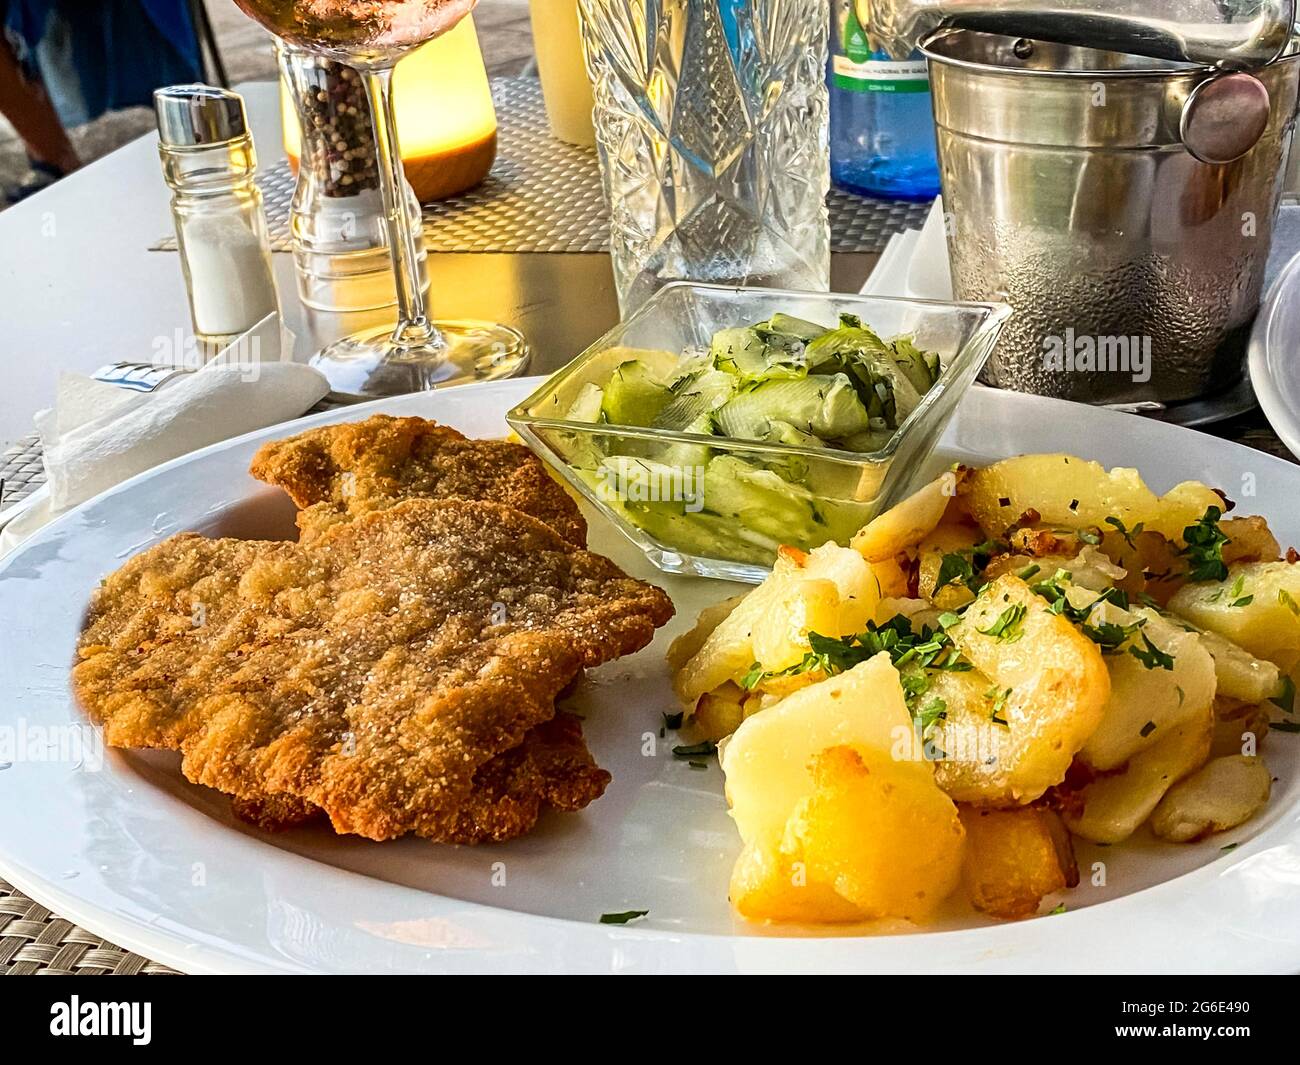 Original Viennese veal escalope with fried potatoes and cucumber salad, Port Andratx, Majorca, Spain Stock Photo